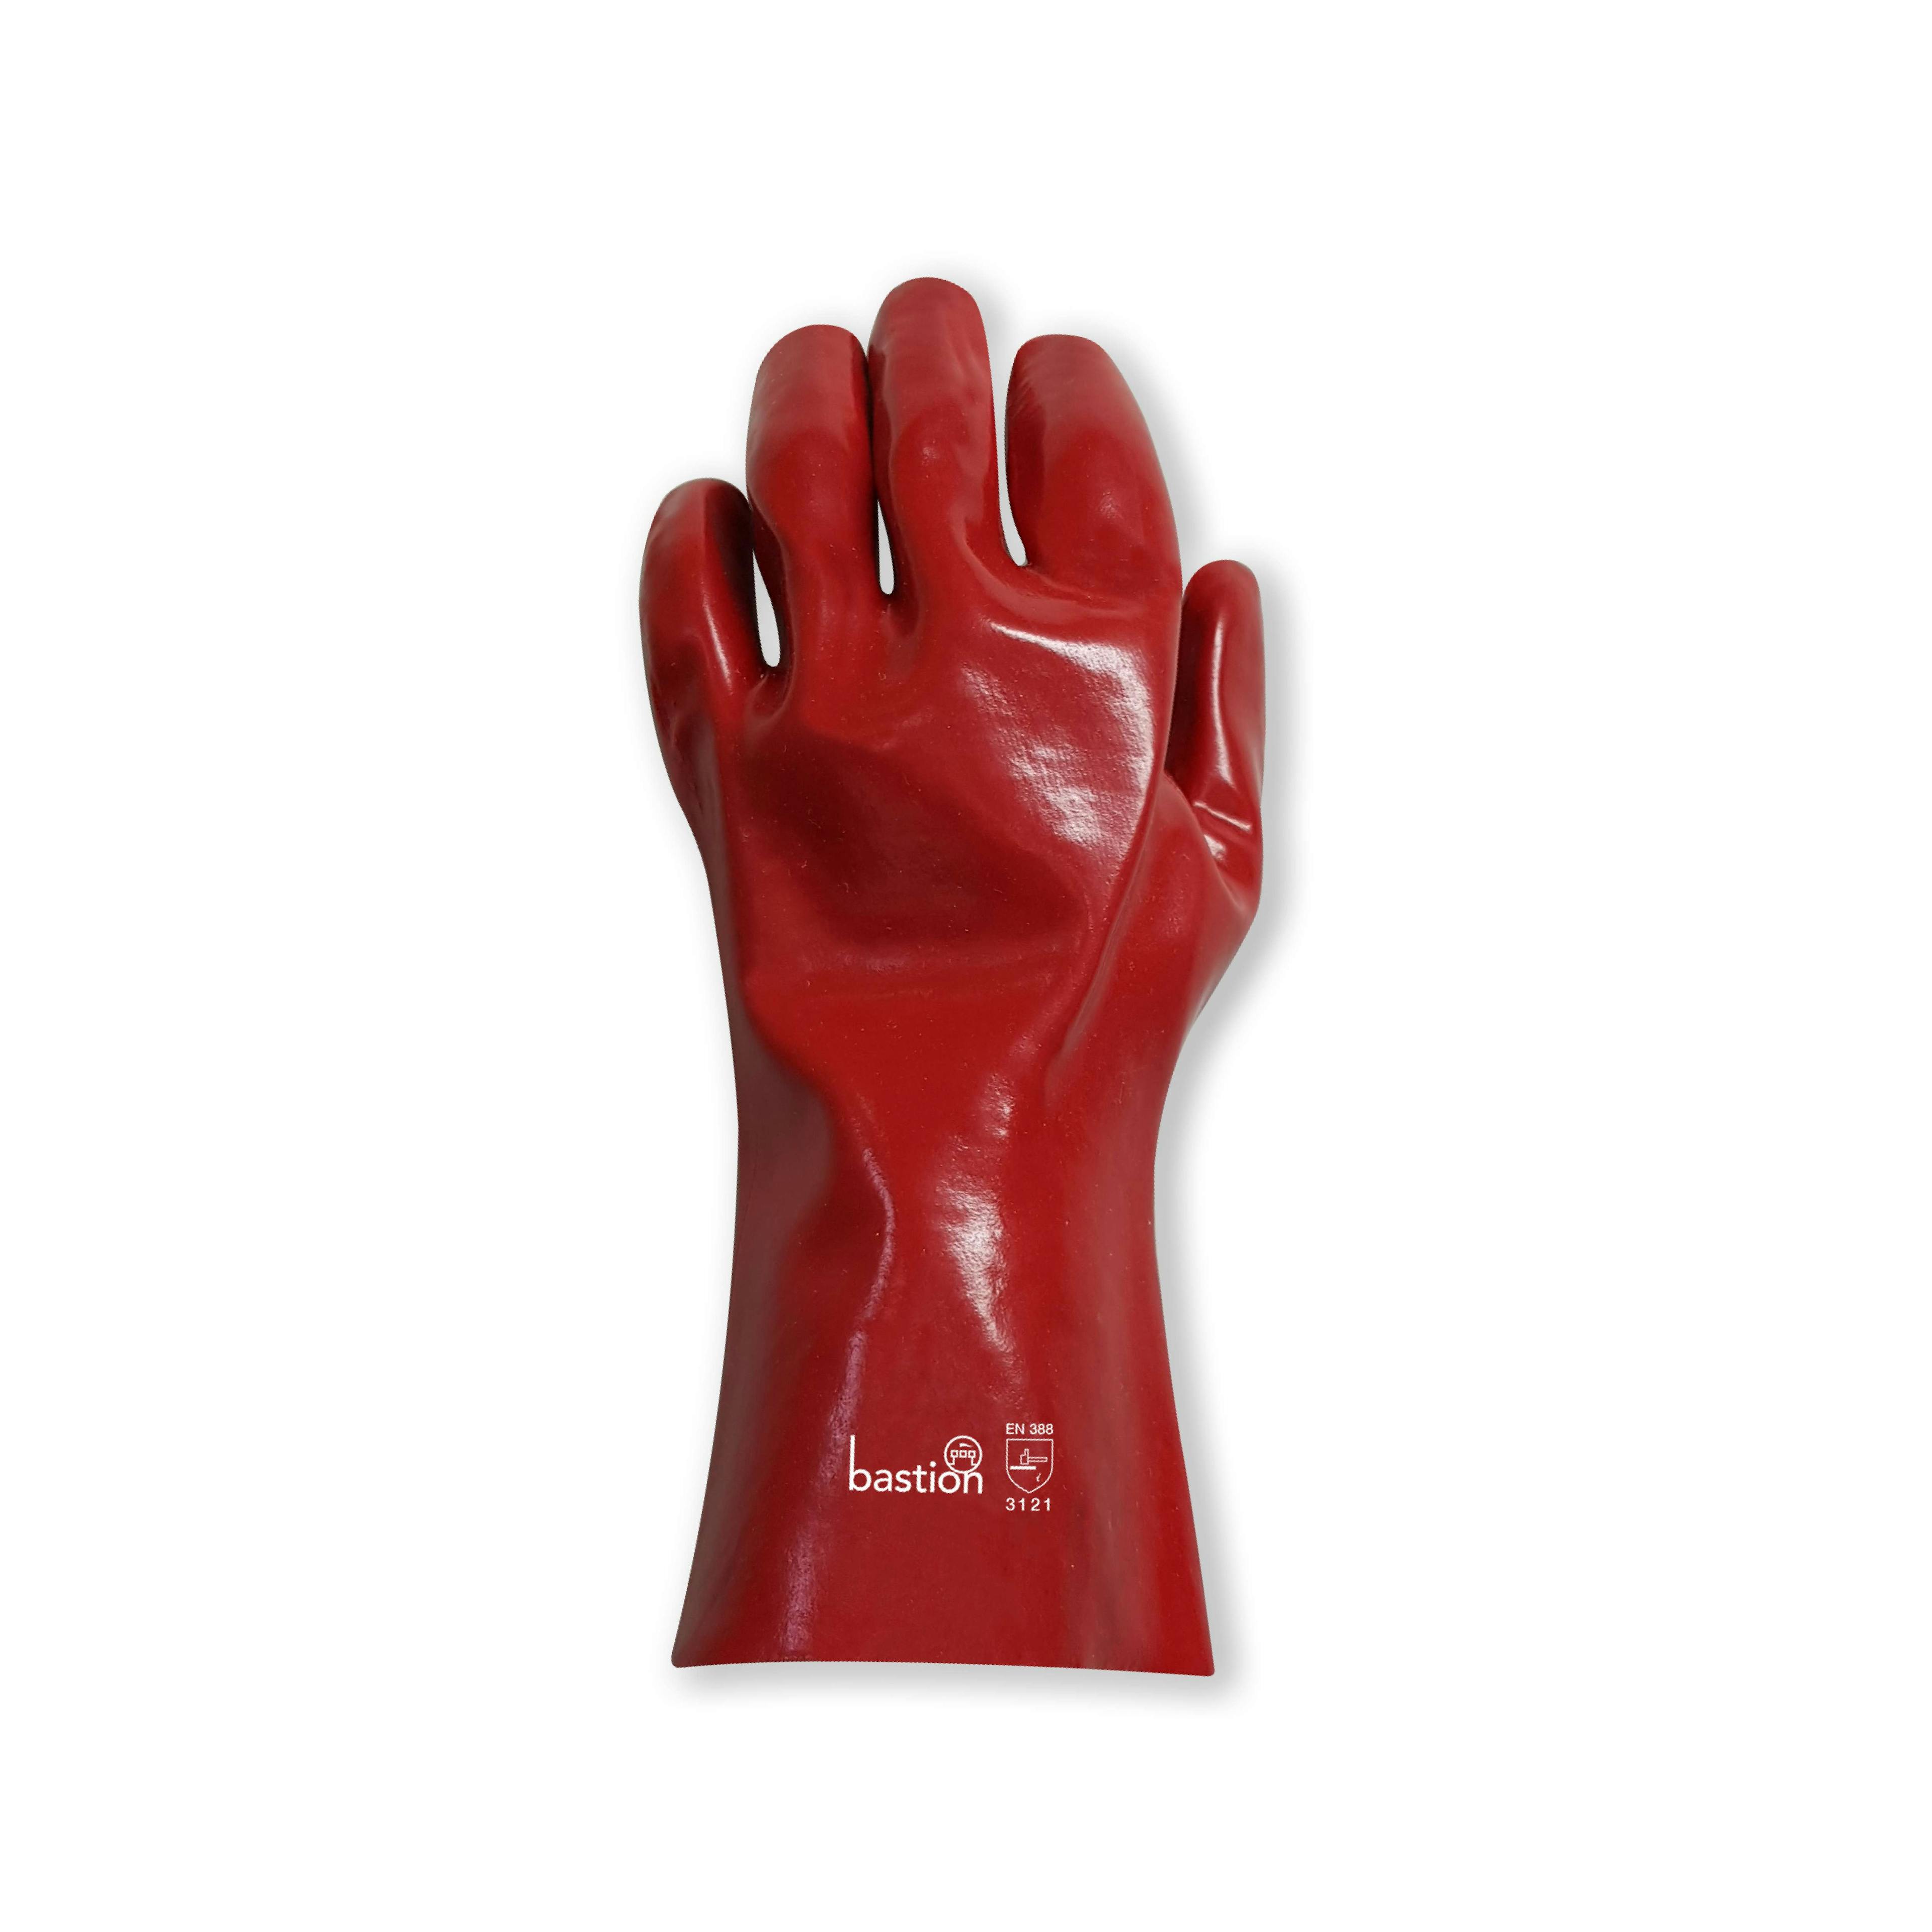 Bastion PVC Gloves, 27cm, Red, Single Dipped, Cotton Lined, X Large - Size 10